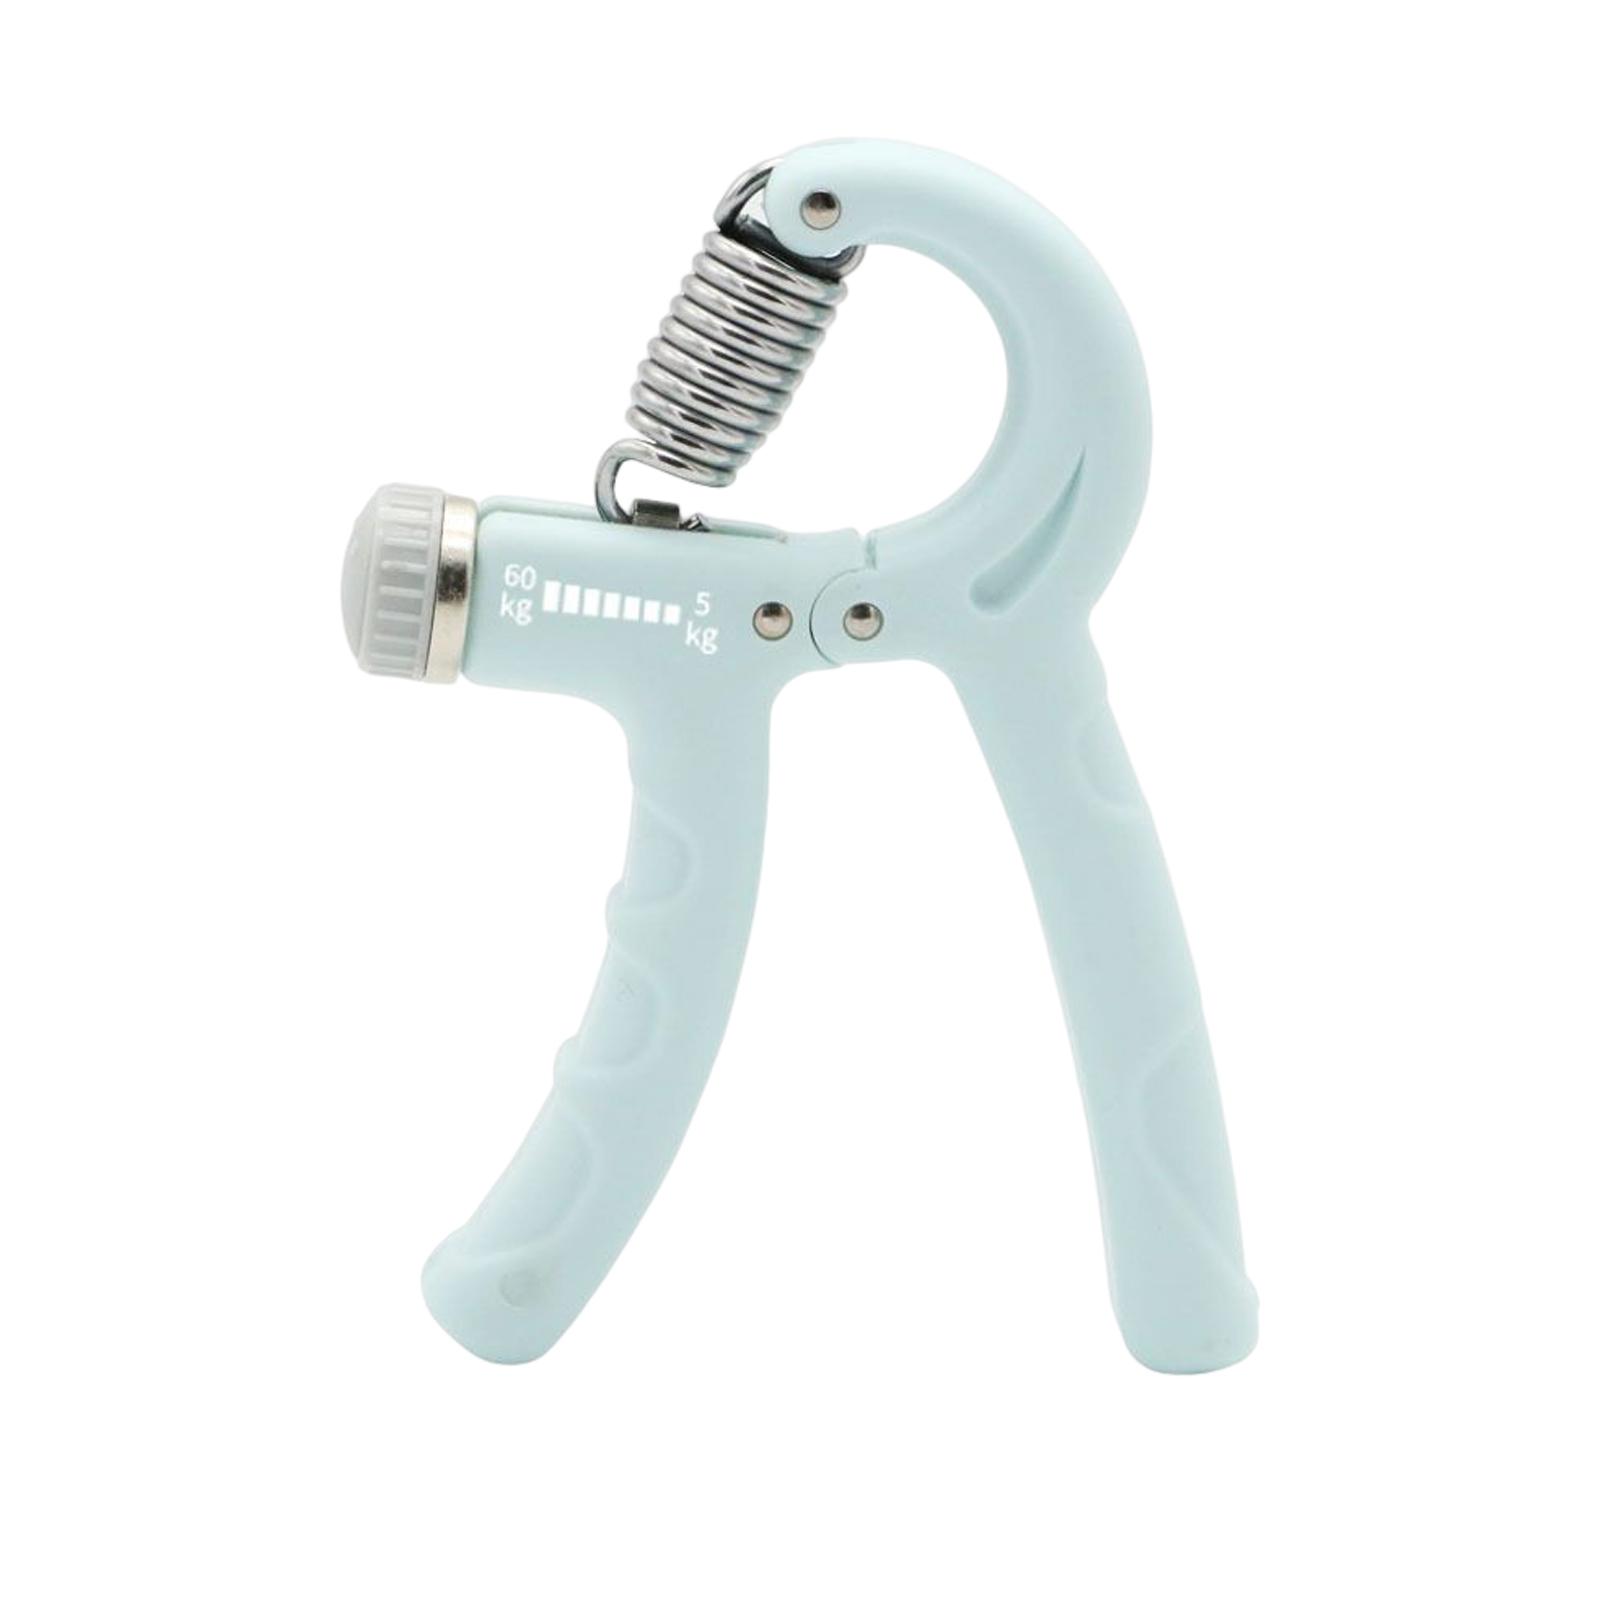 Hand Grip Strengthener Adjustable with Counting Function Fitness Equipment